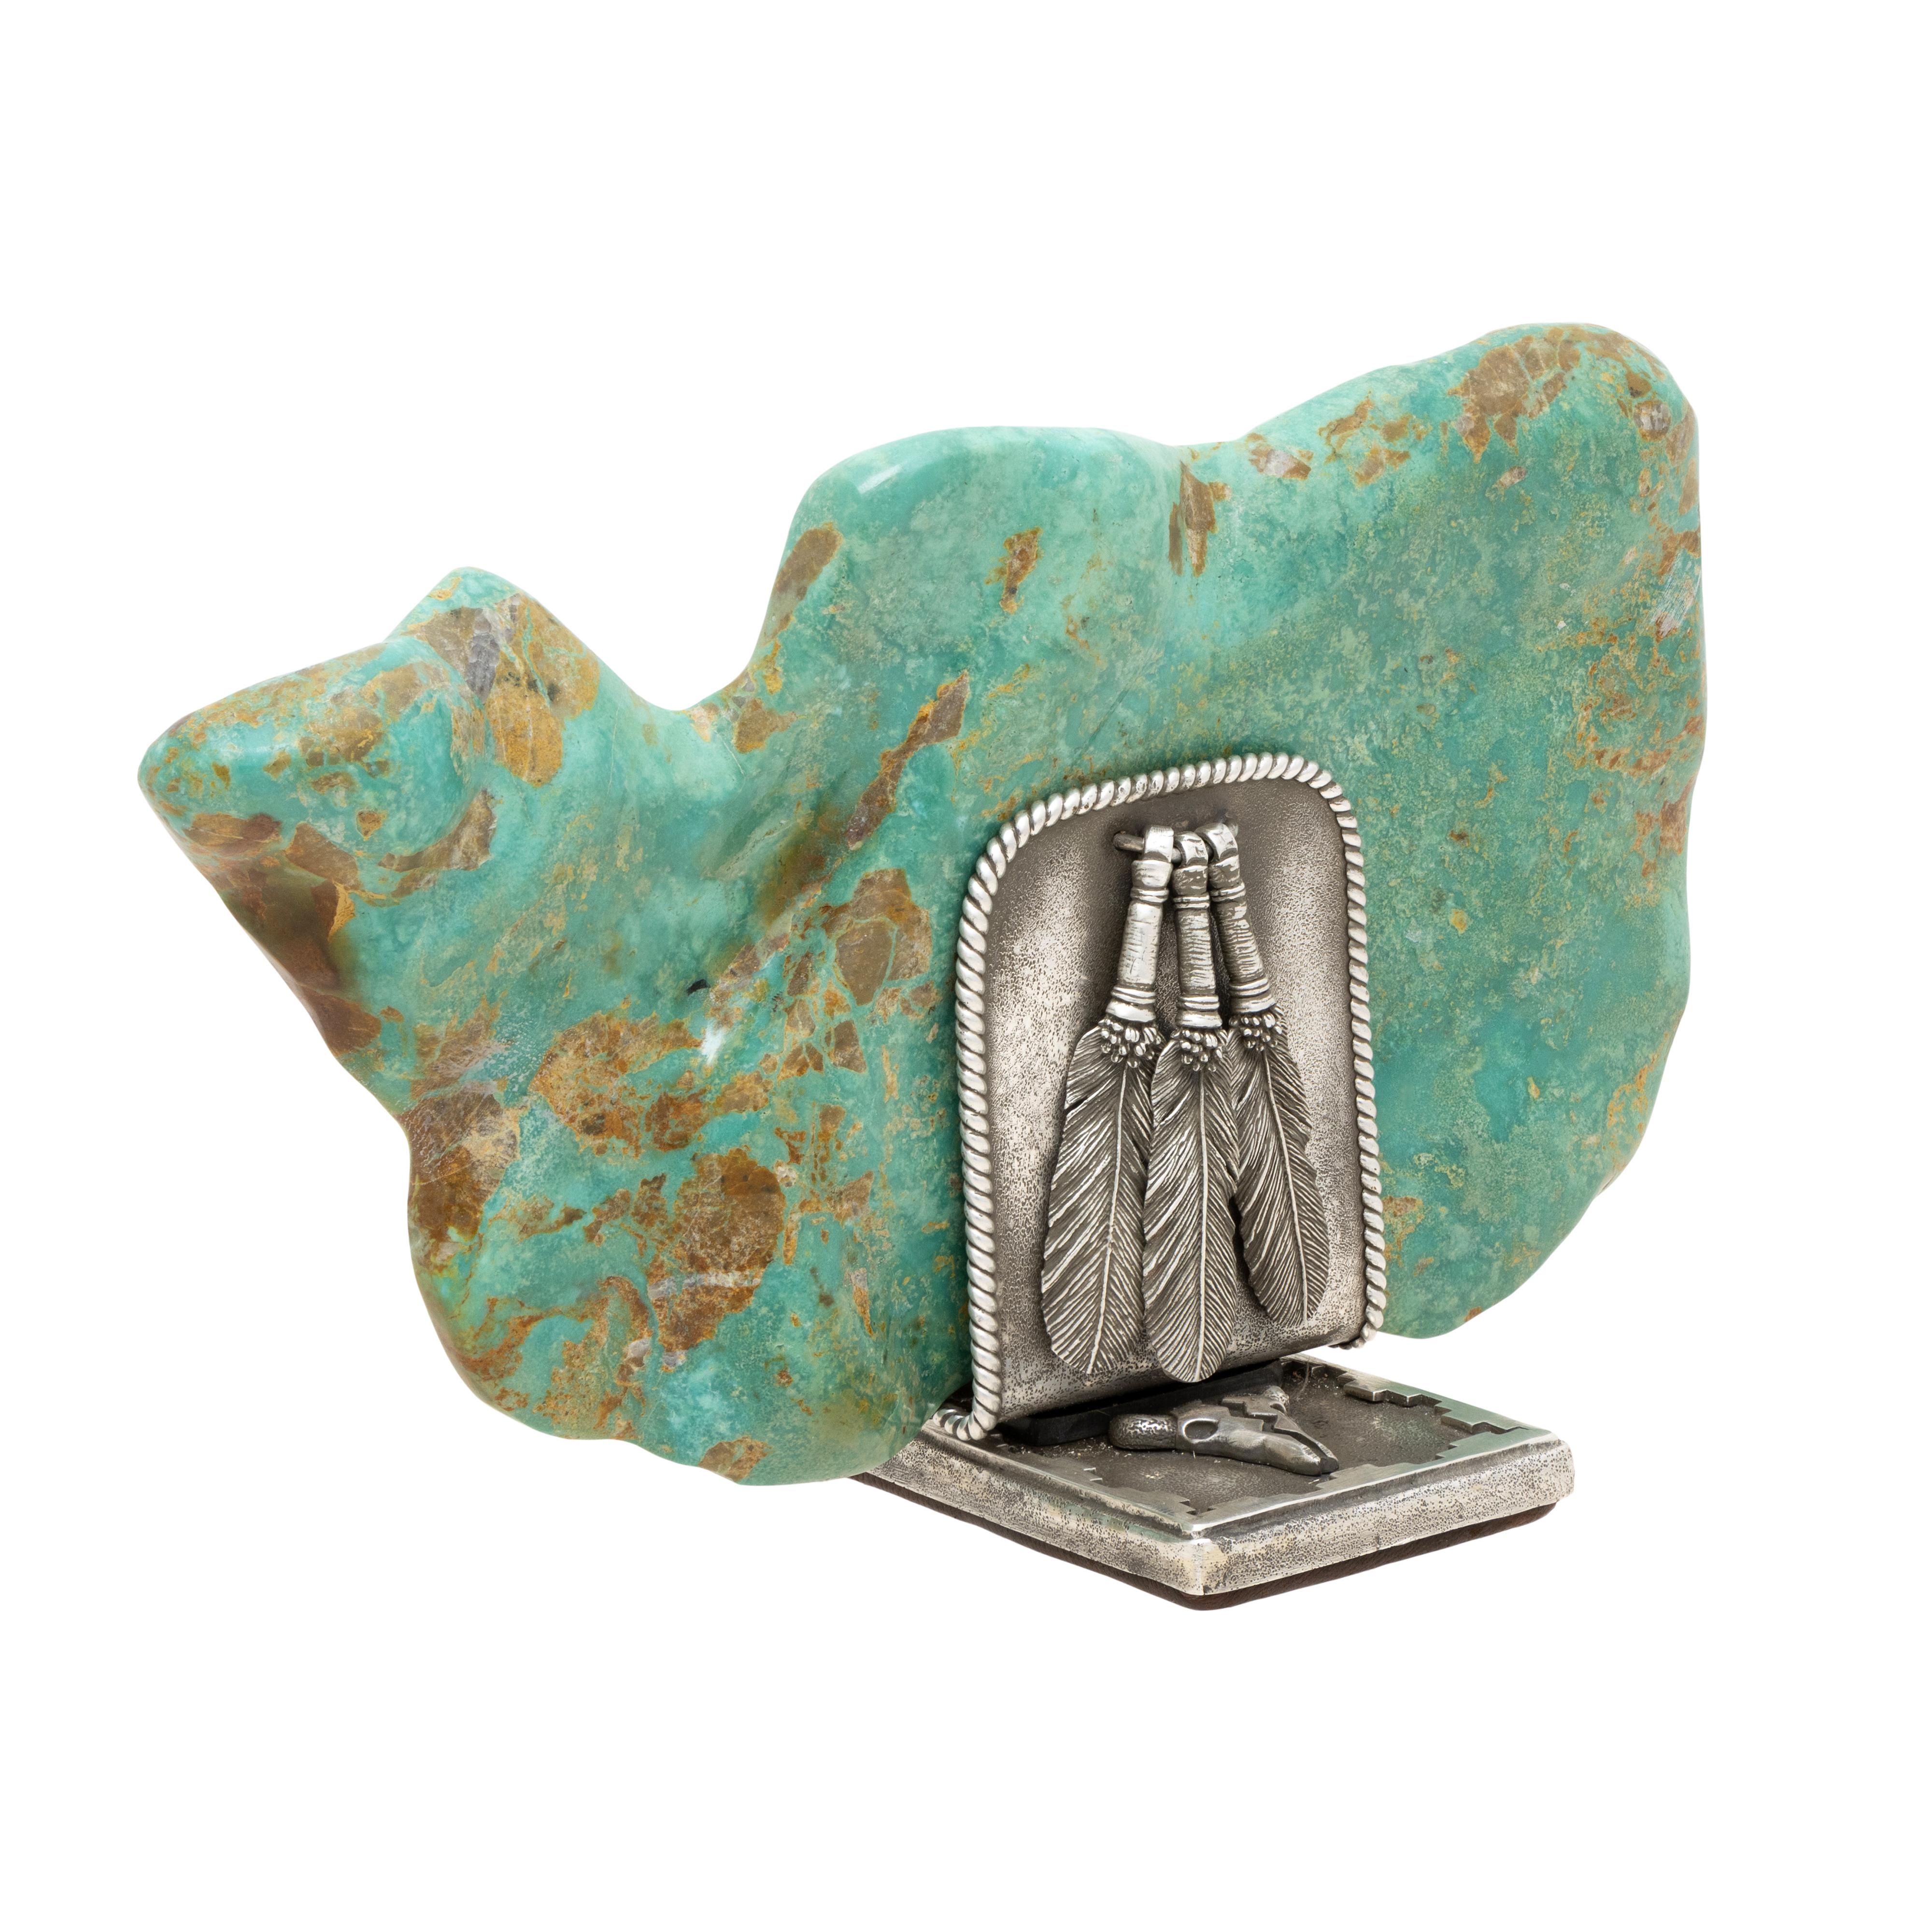 Magnificent turquoise nugget from the Hachita Mine in New Mexico. Nugget weight 5,575 cts. Mounted on custom .925 sterling silver base having silver feathers and buffalo skulls. Base custom made by artisan Jami Hansen. Exceptional and one of a